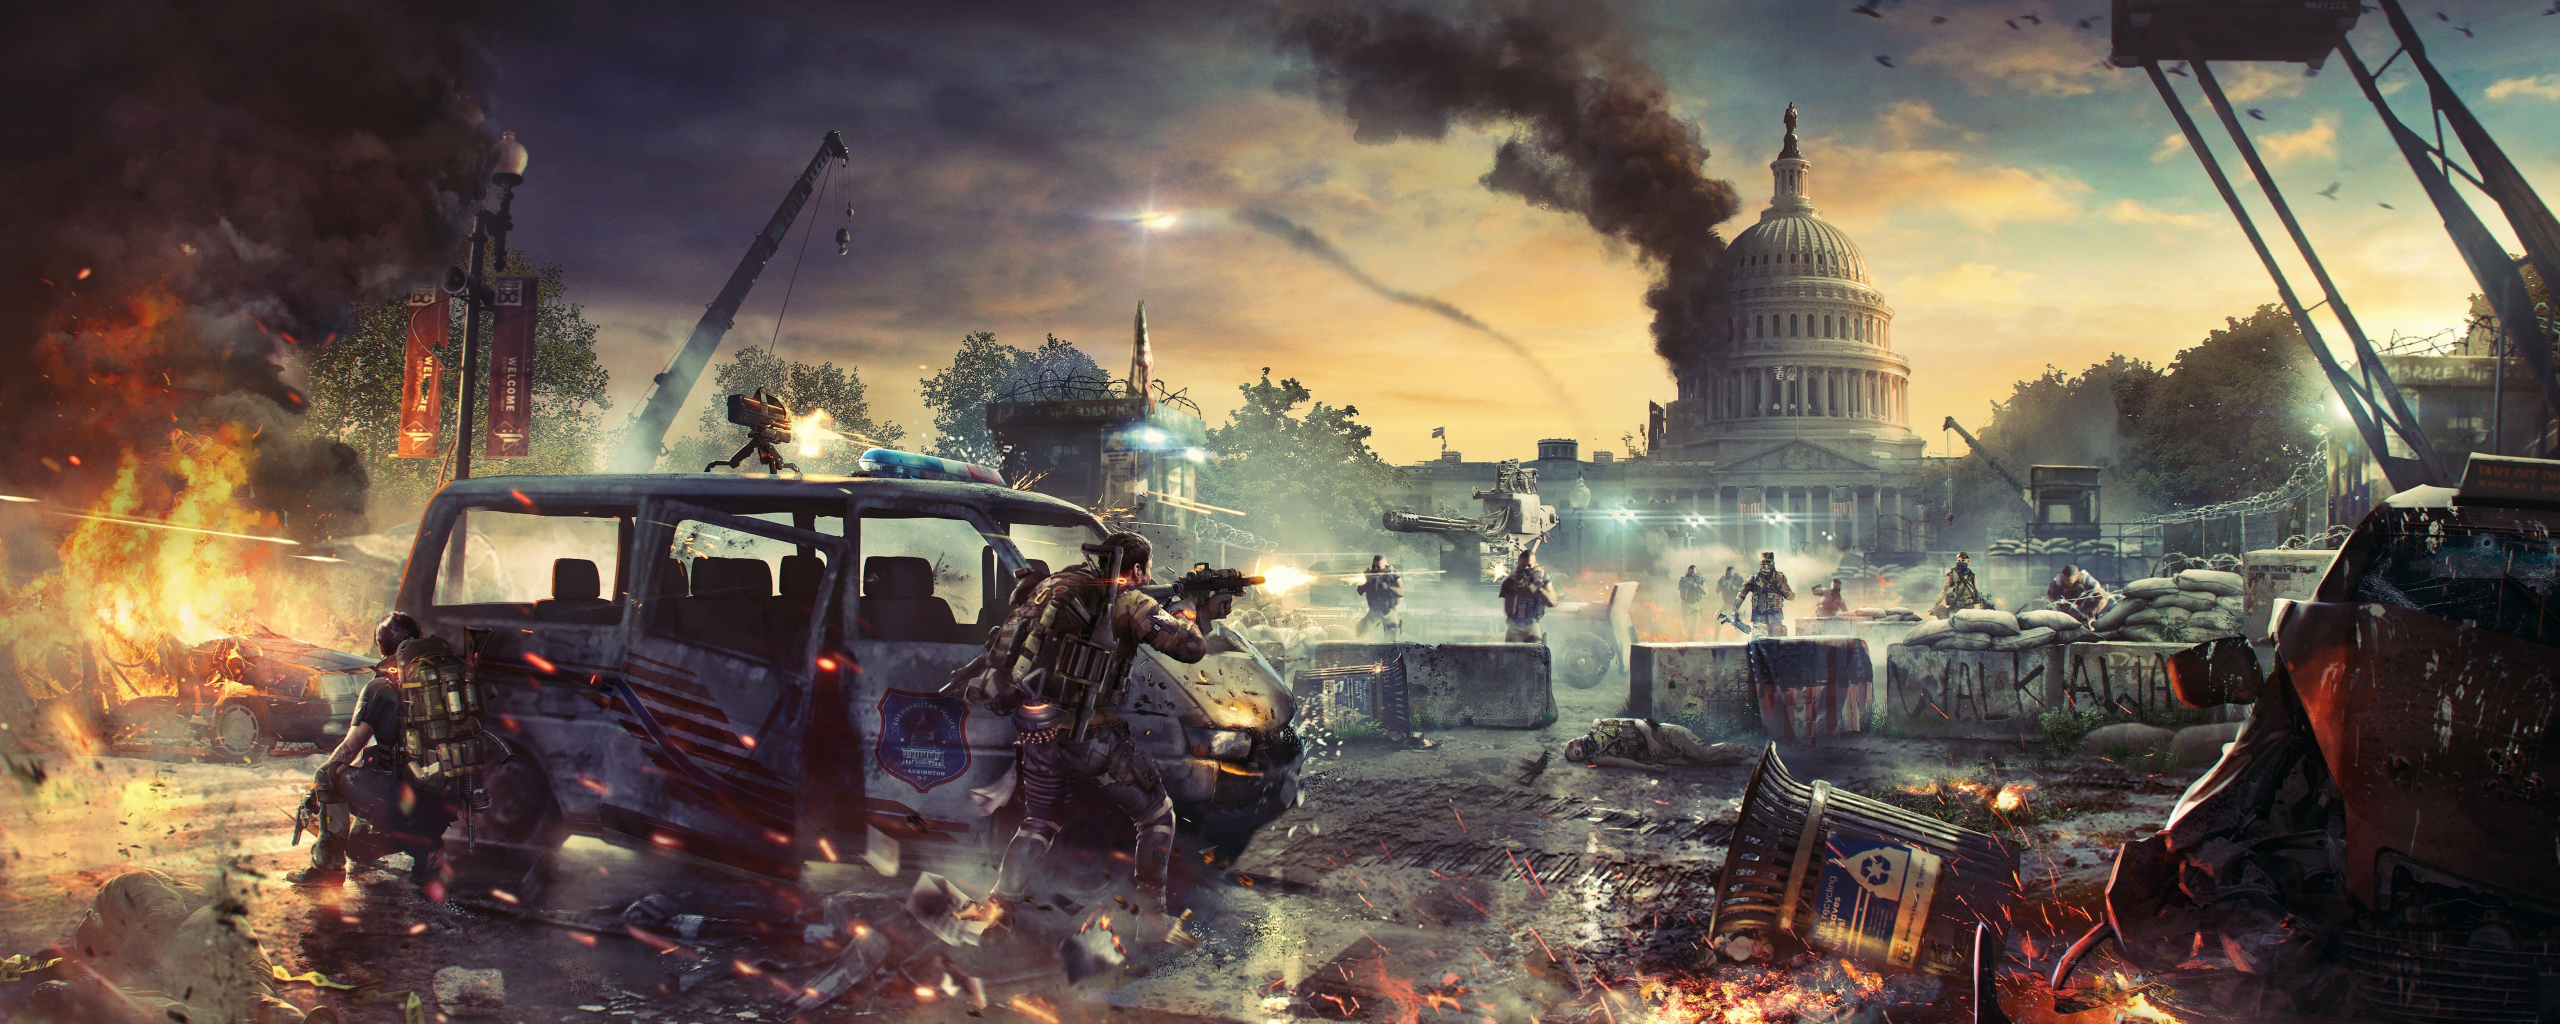 the division 2 wallpaper